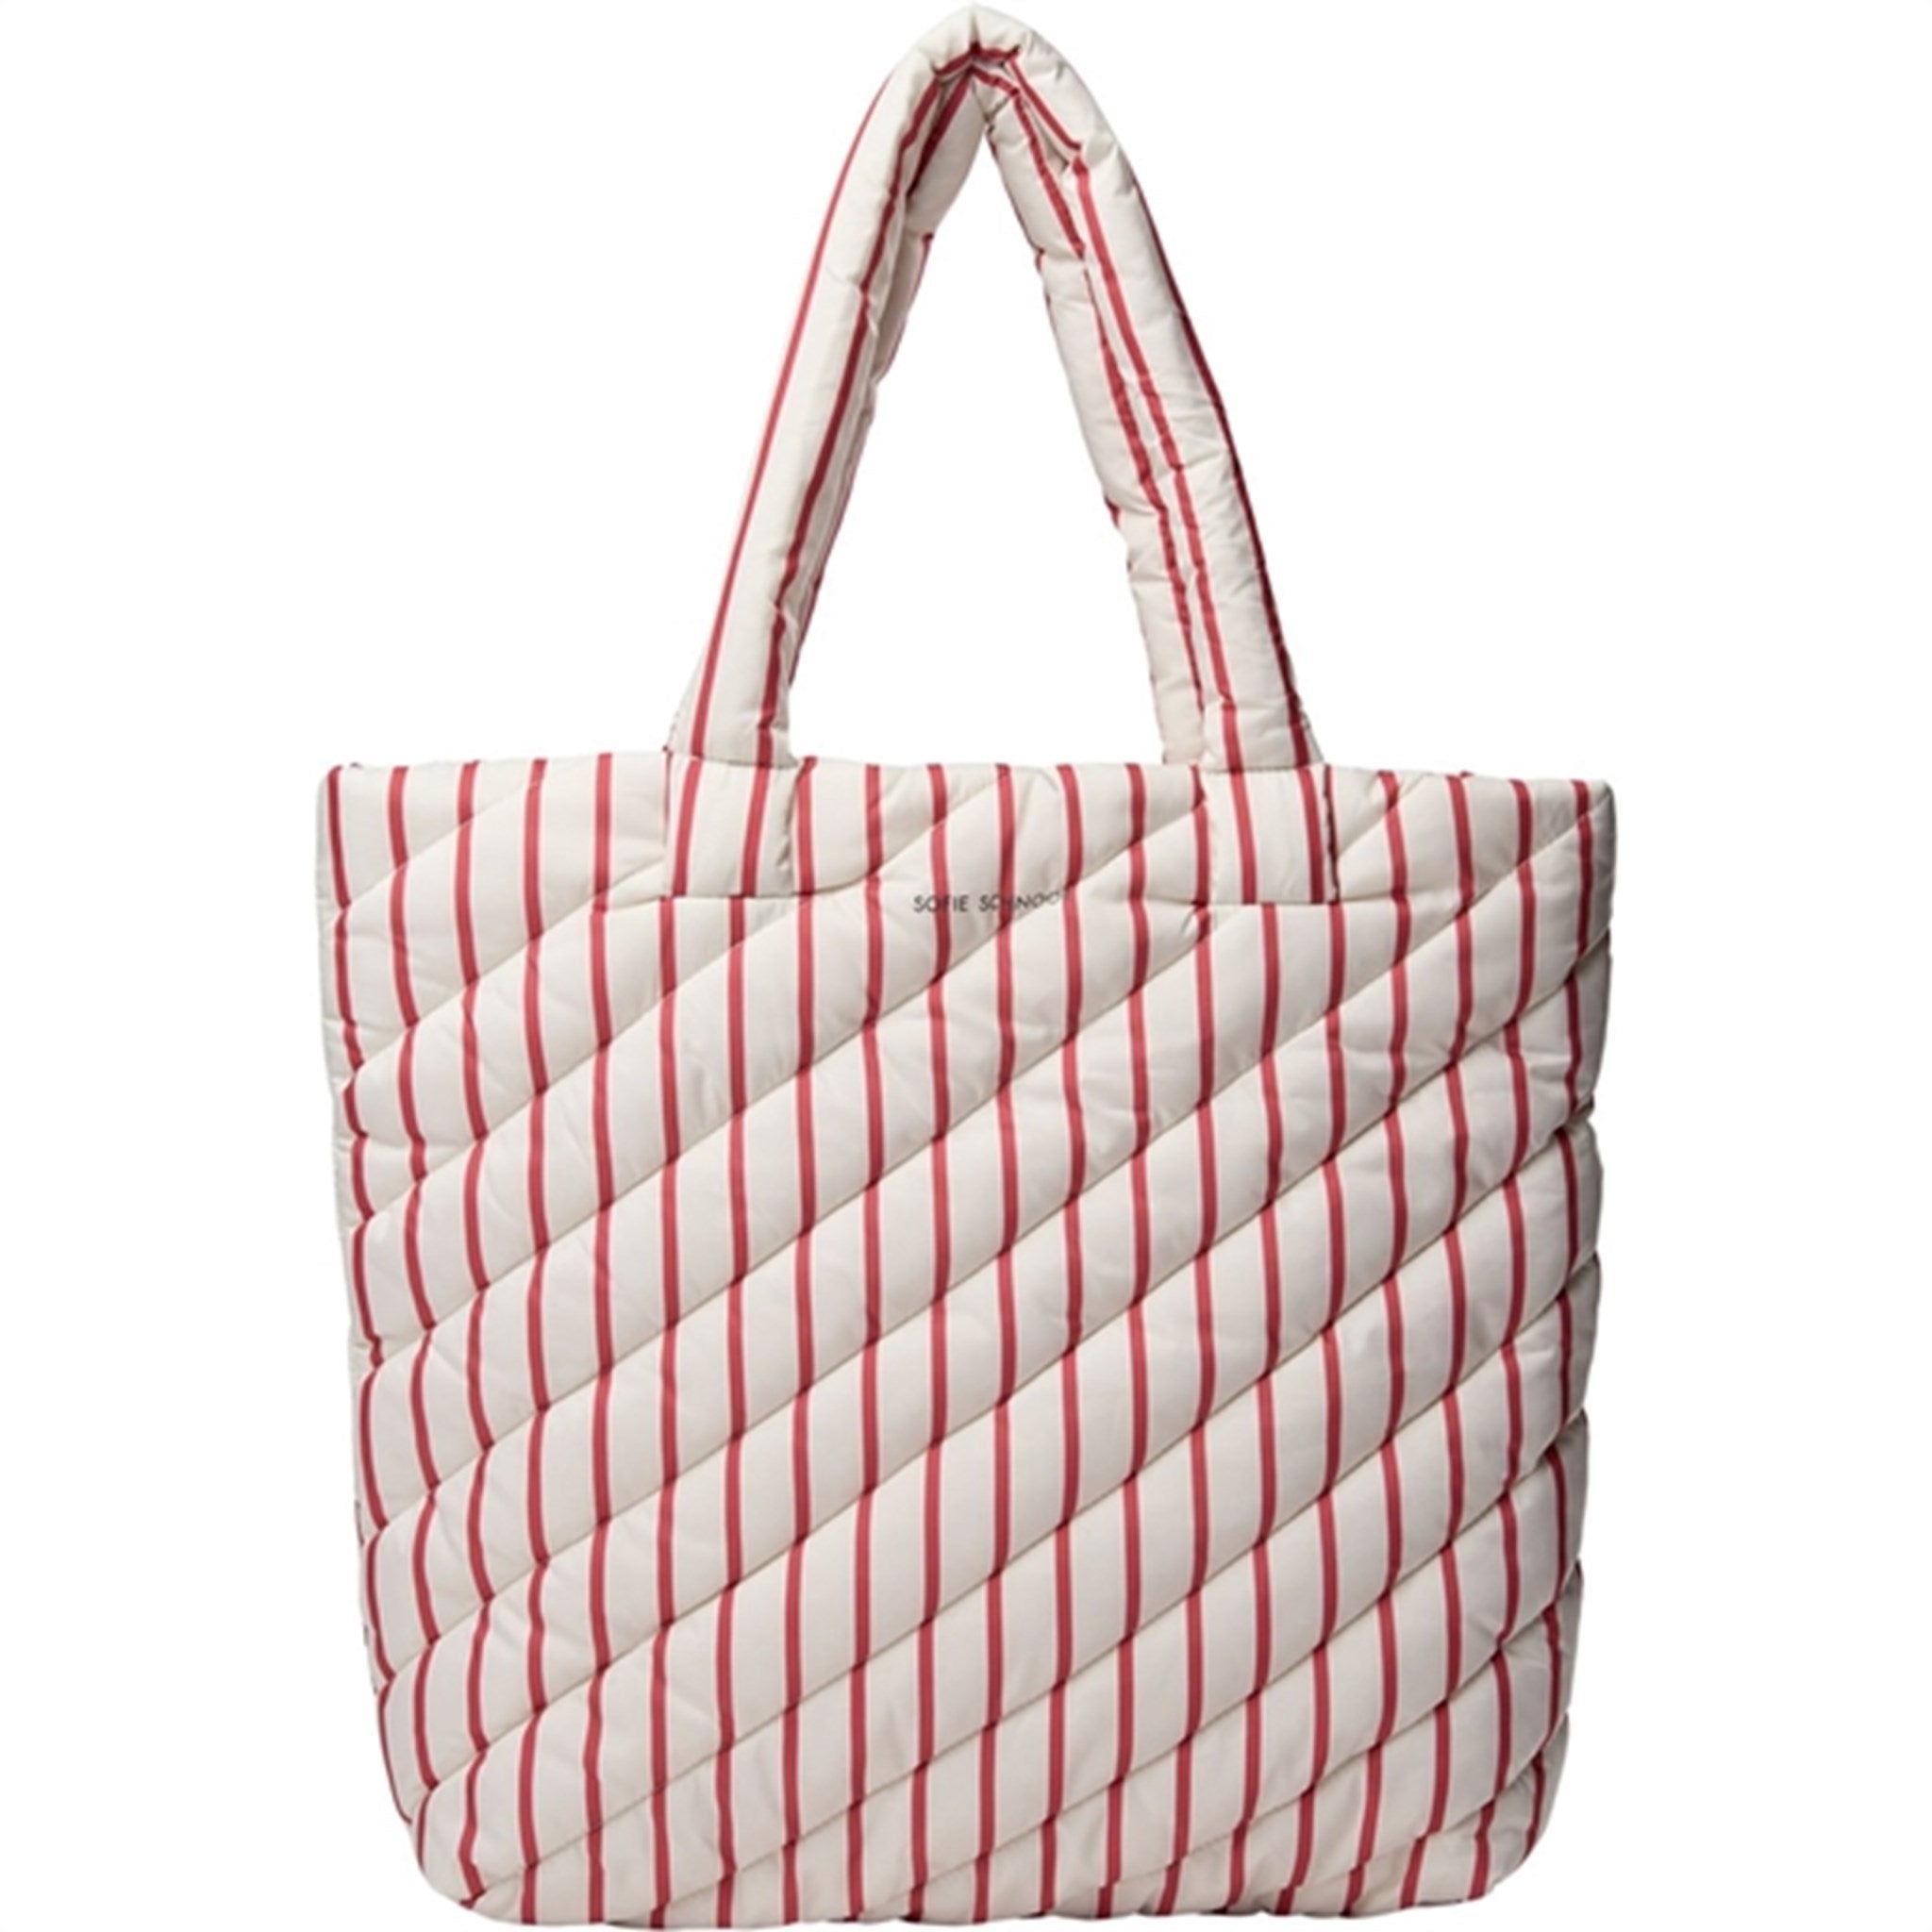 Sofie Schnoor Off White/ Berry Striped Totebag